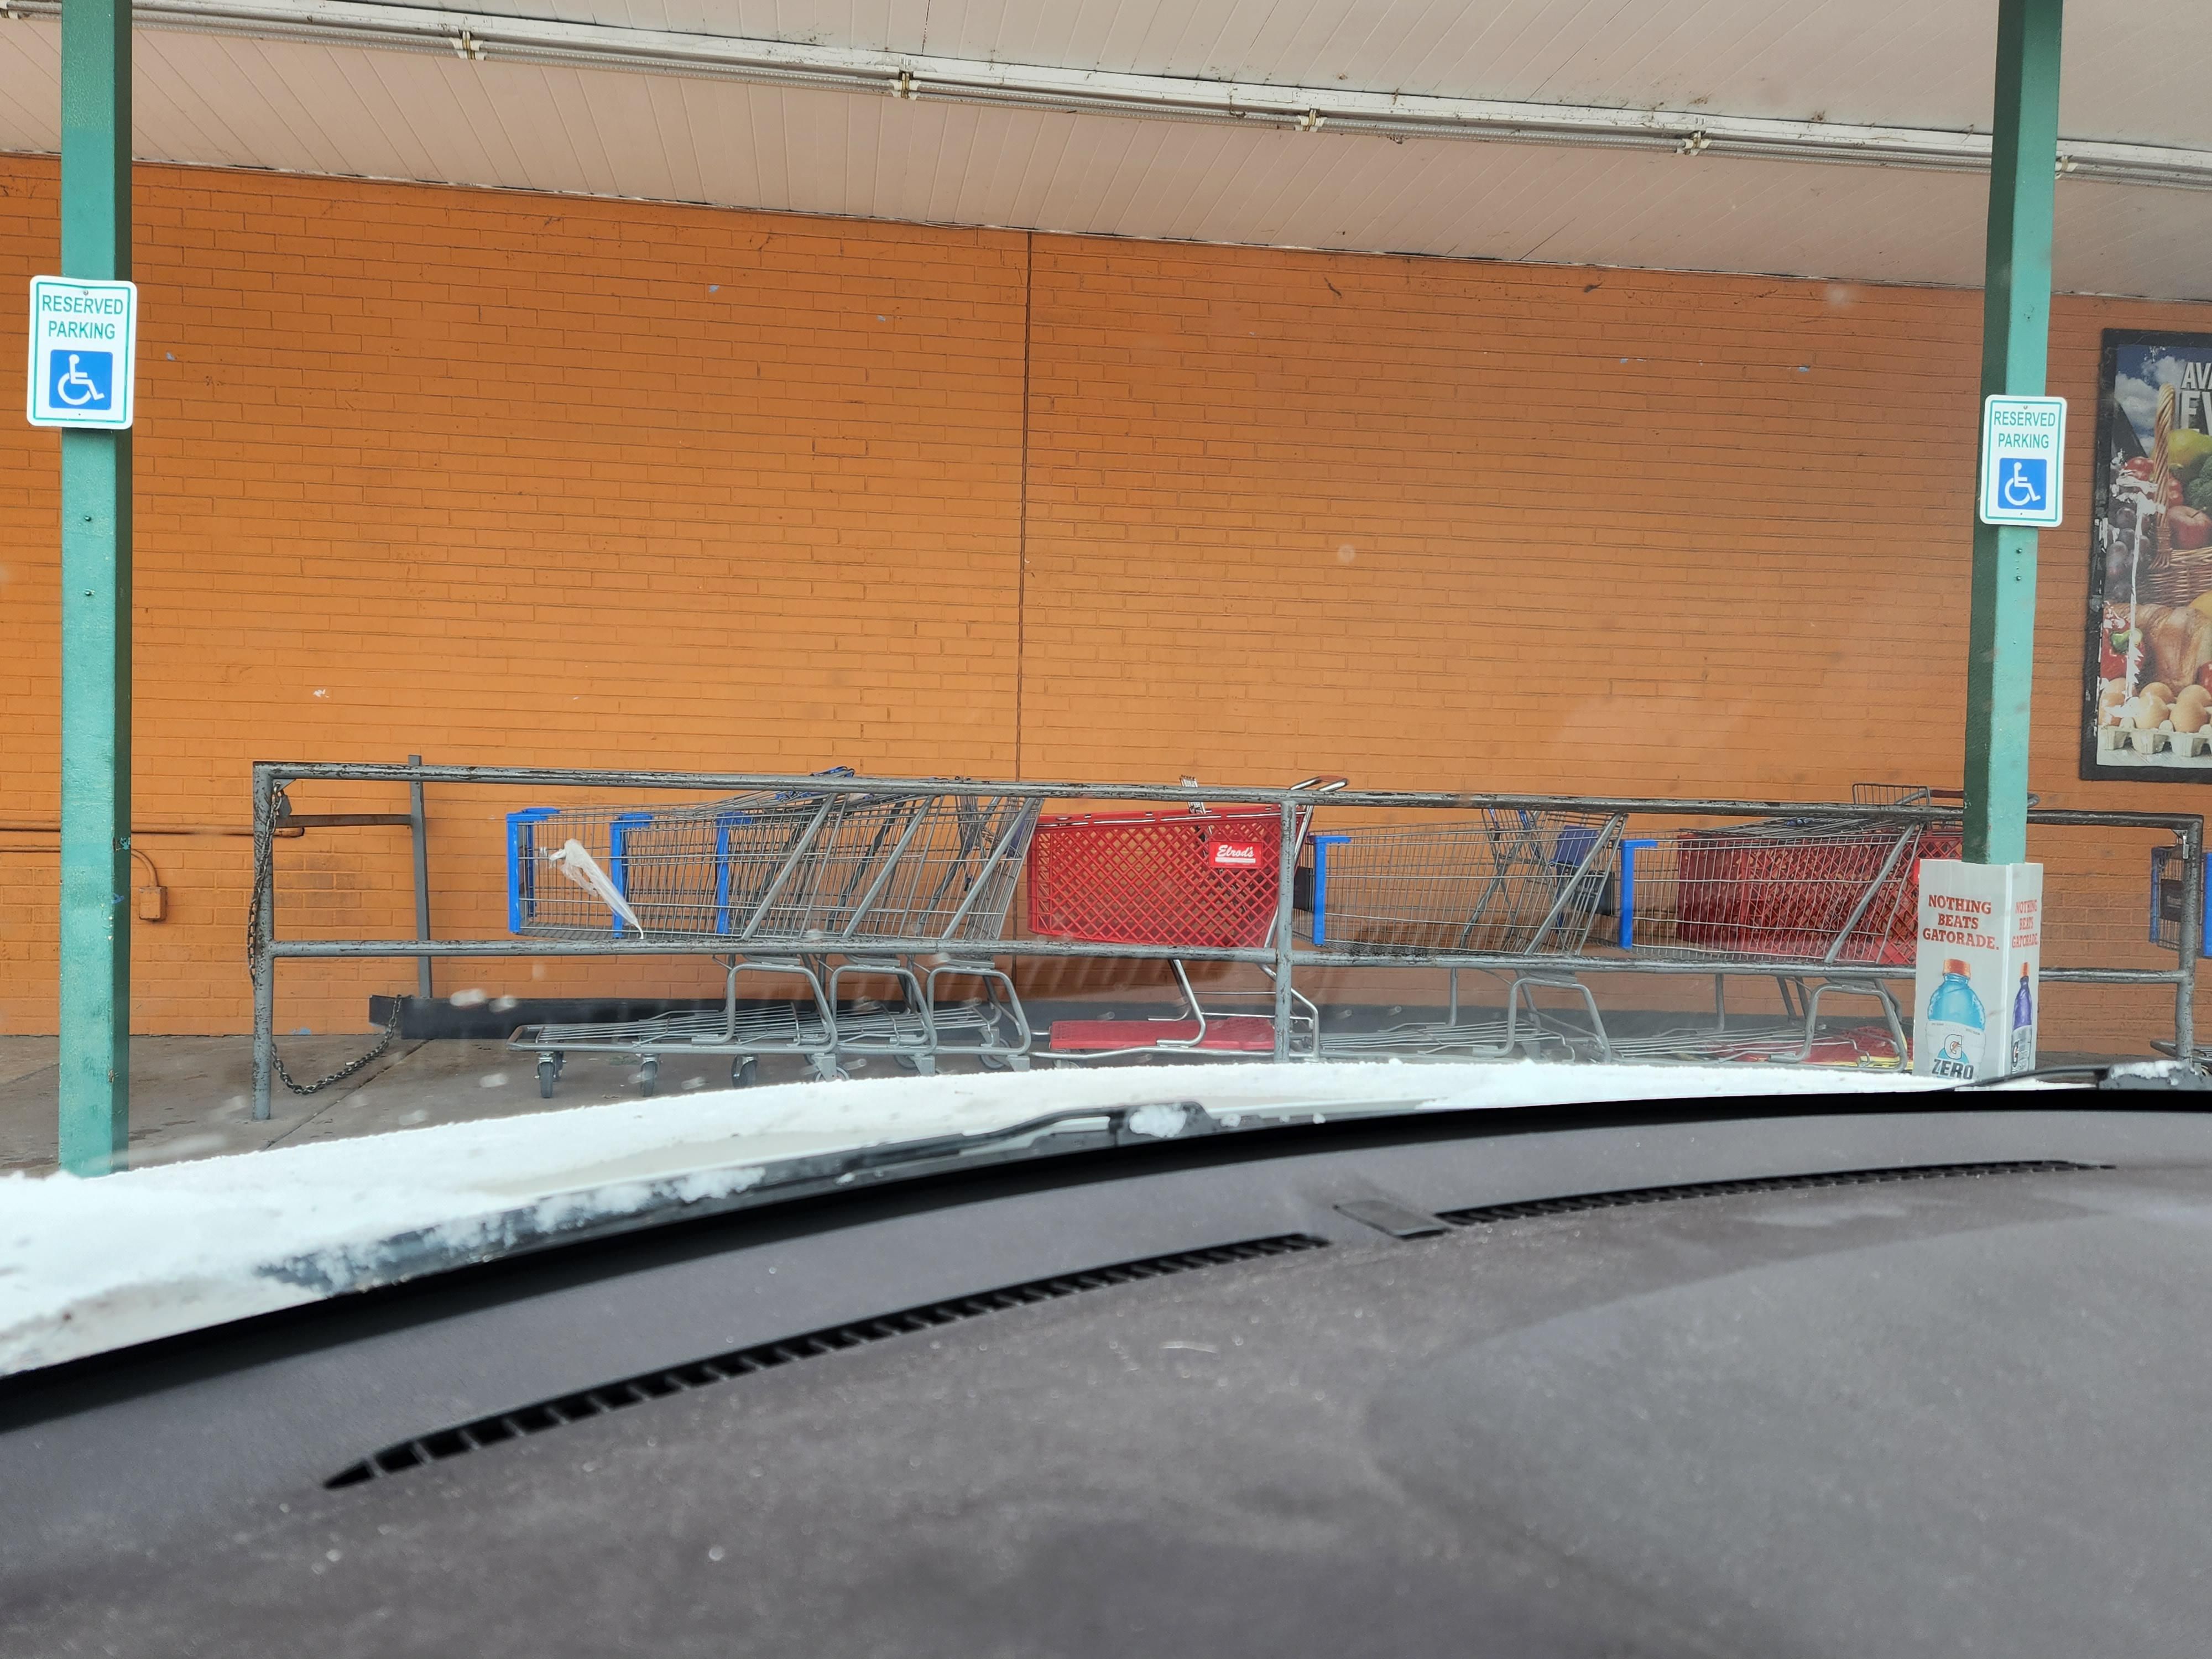 My local Mexican grocery store only use carts from other stores.